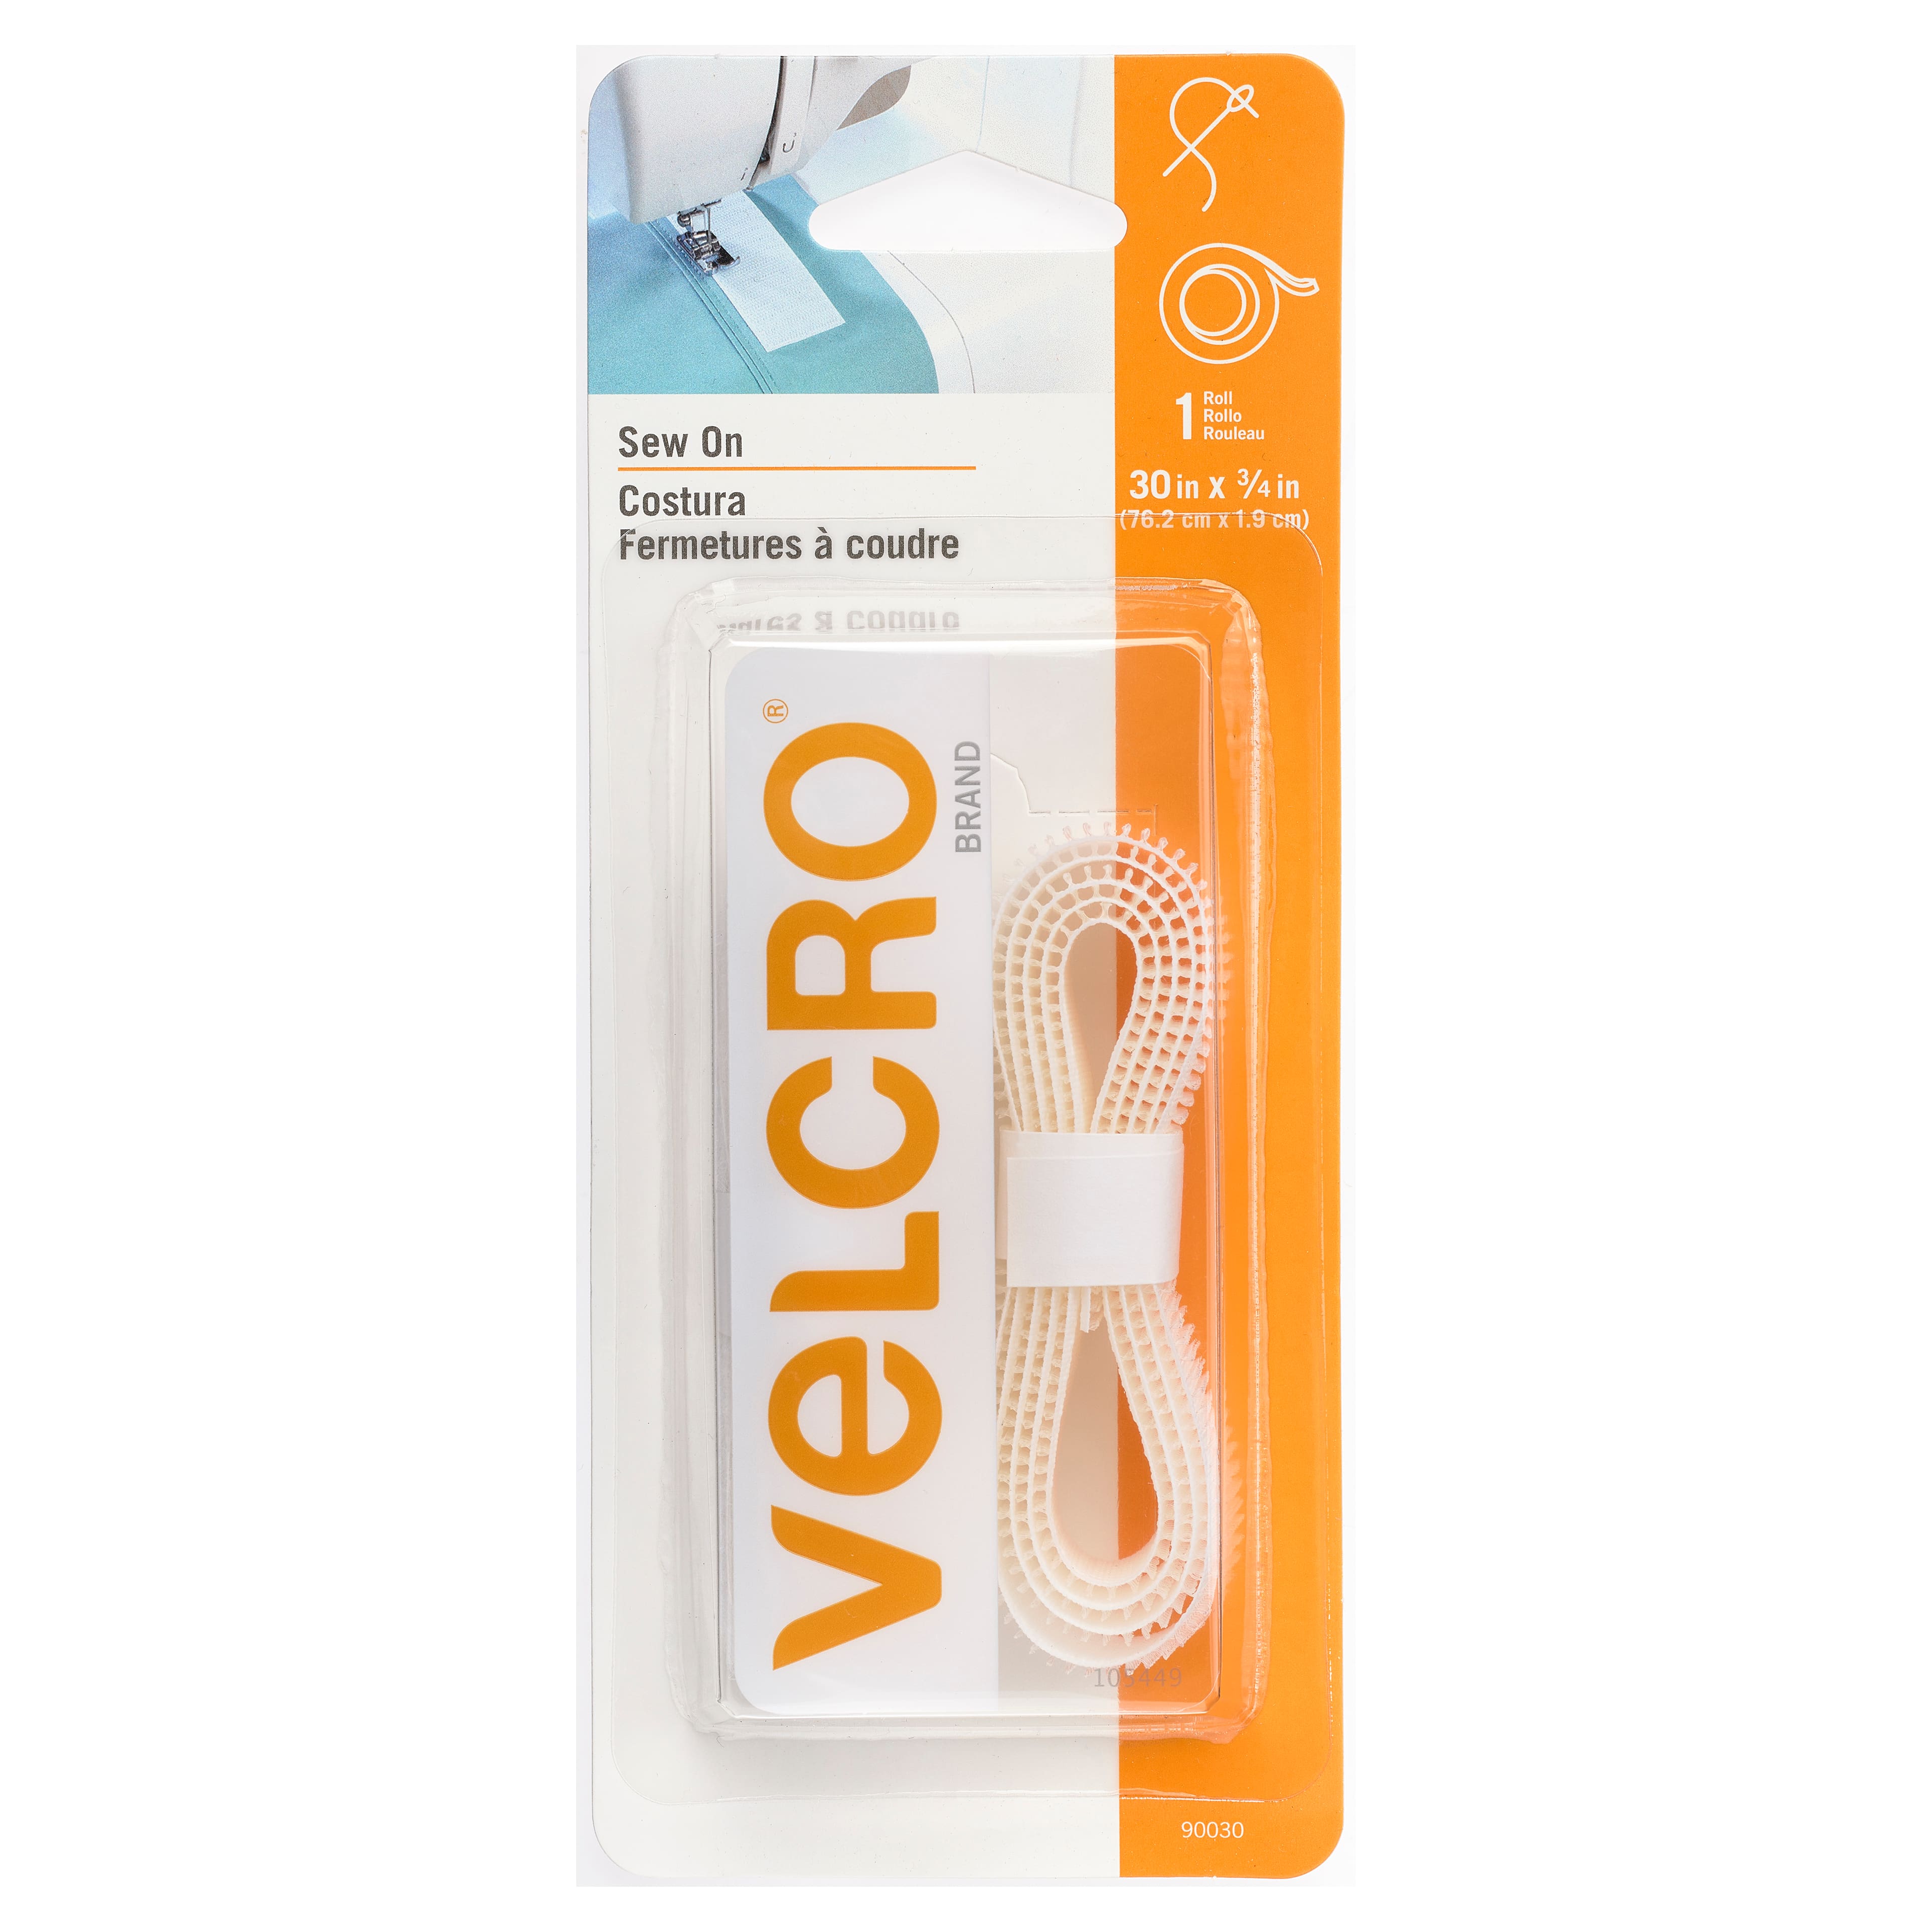 VELCRO Brand - 90029 For Fabrics | Sew On Fabric Tape for Alterations and  Hemming | No Ironing or Gluing | Ideal Substitute for Snaps and Buttons 